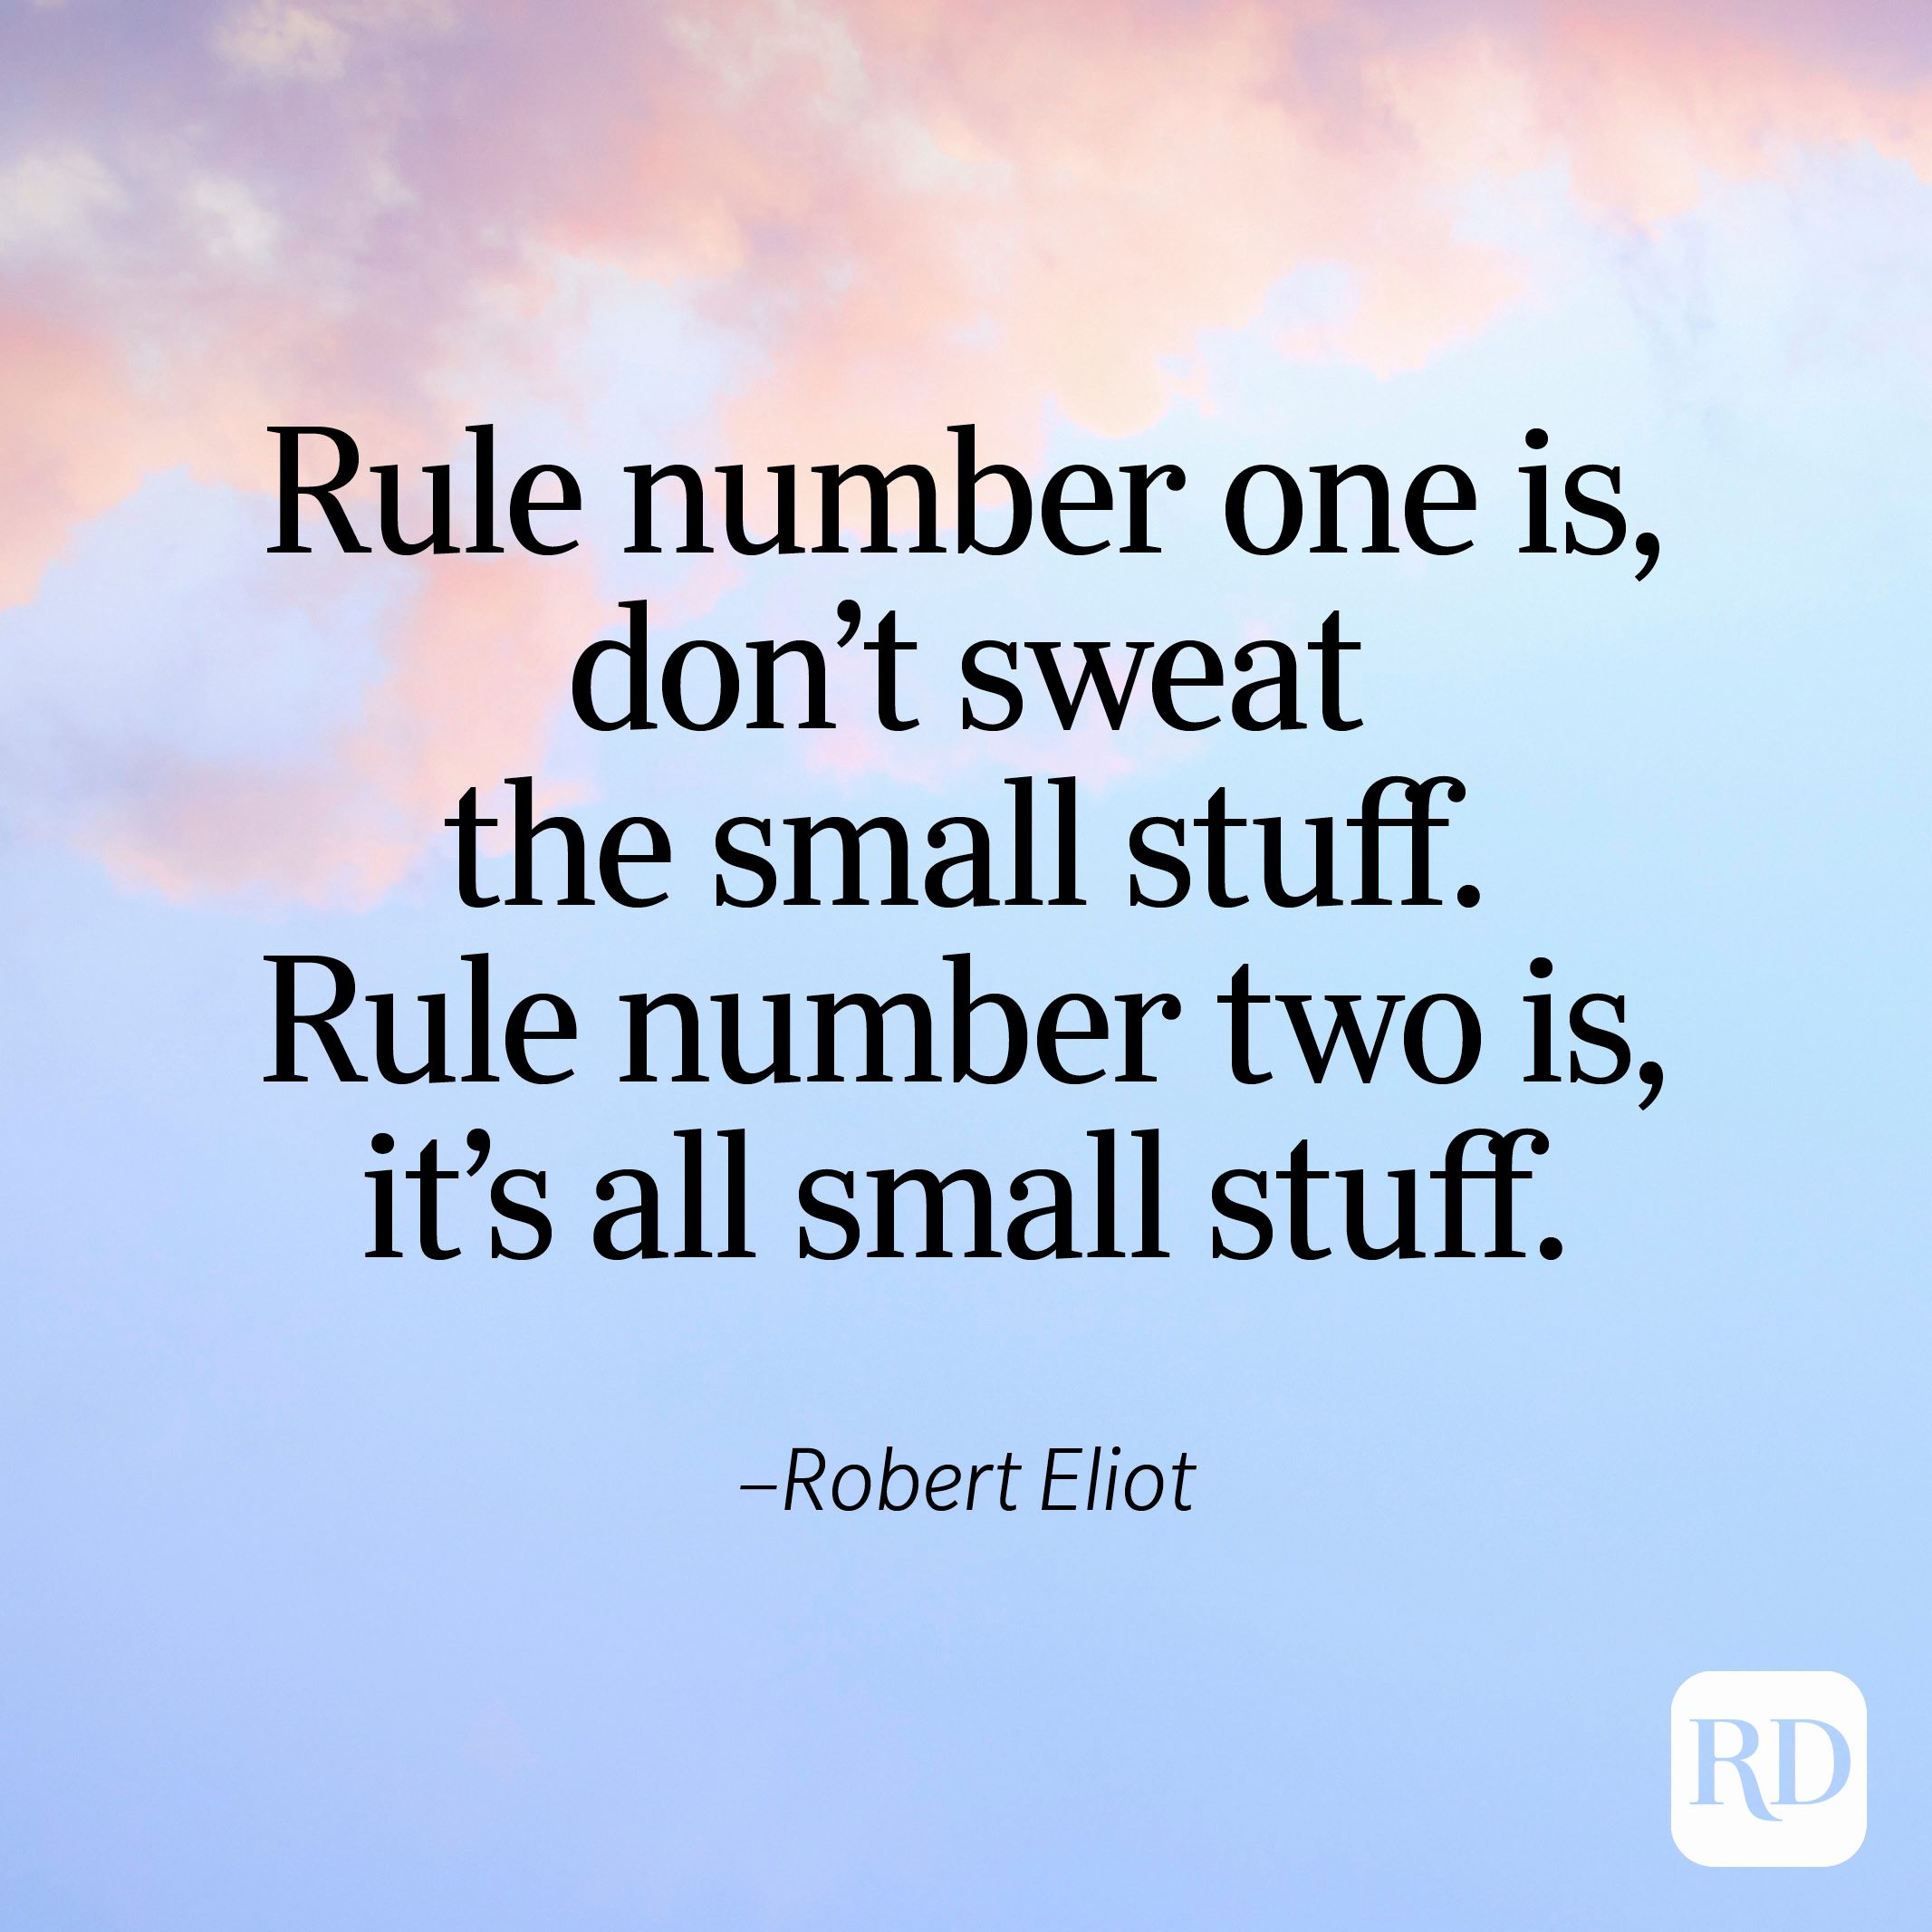 "Rule number one is, don't sweat the small stuff. Rule number two is, it's all small stuff." —Robert Eliot